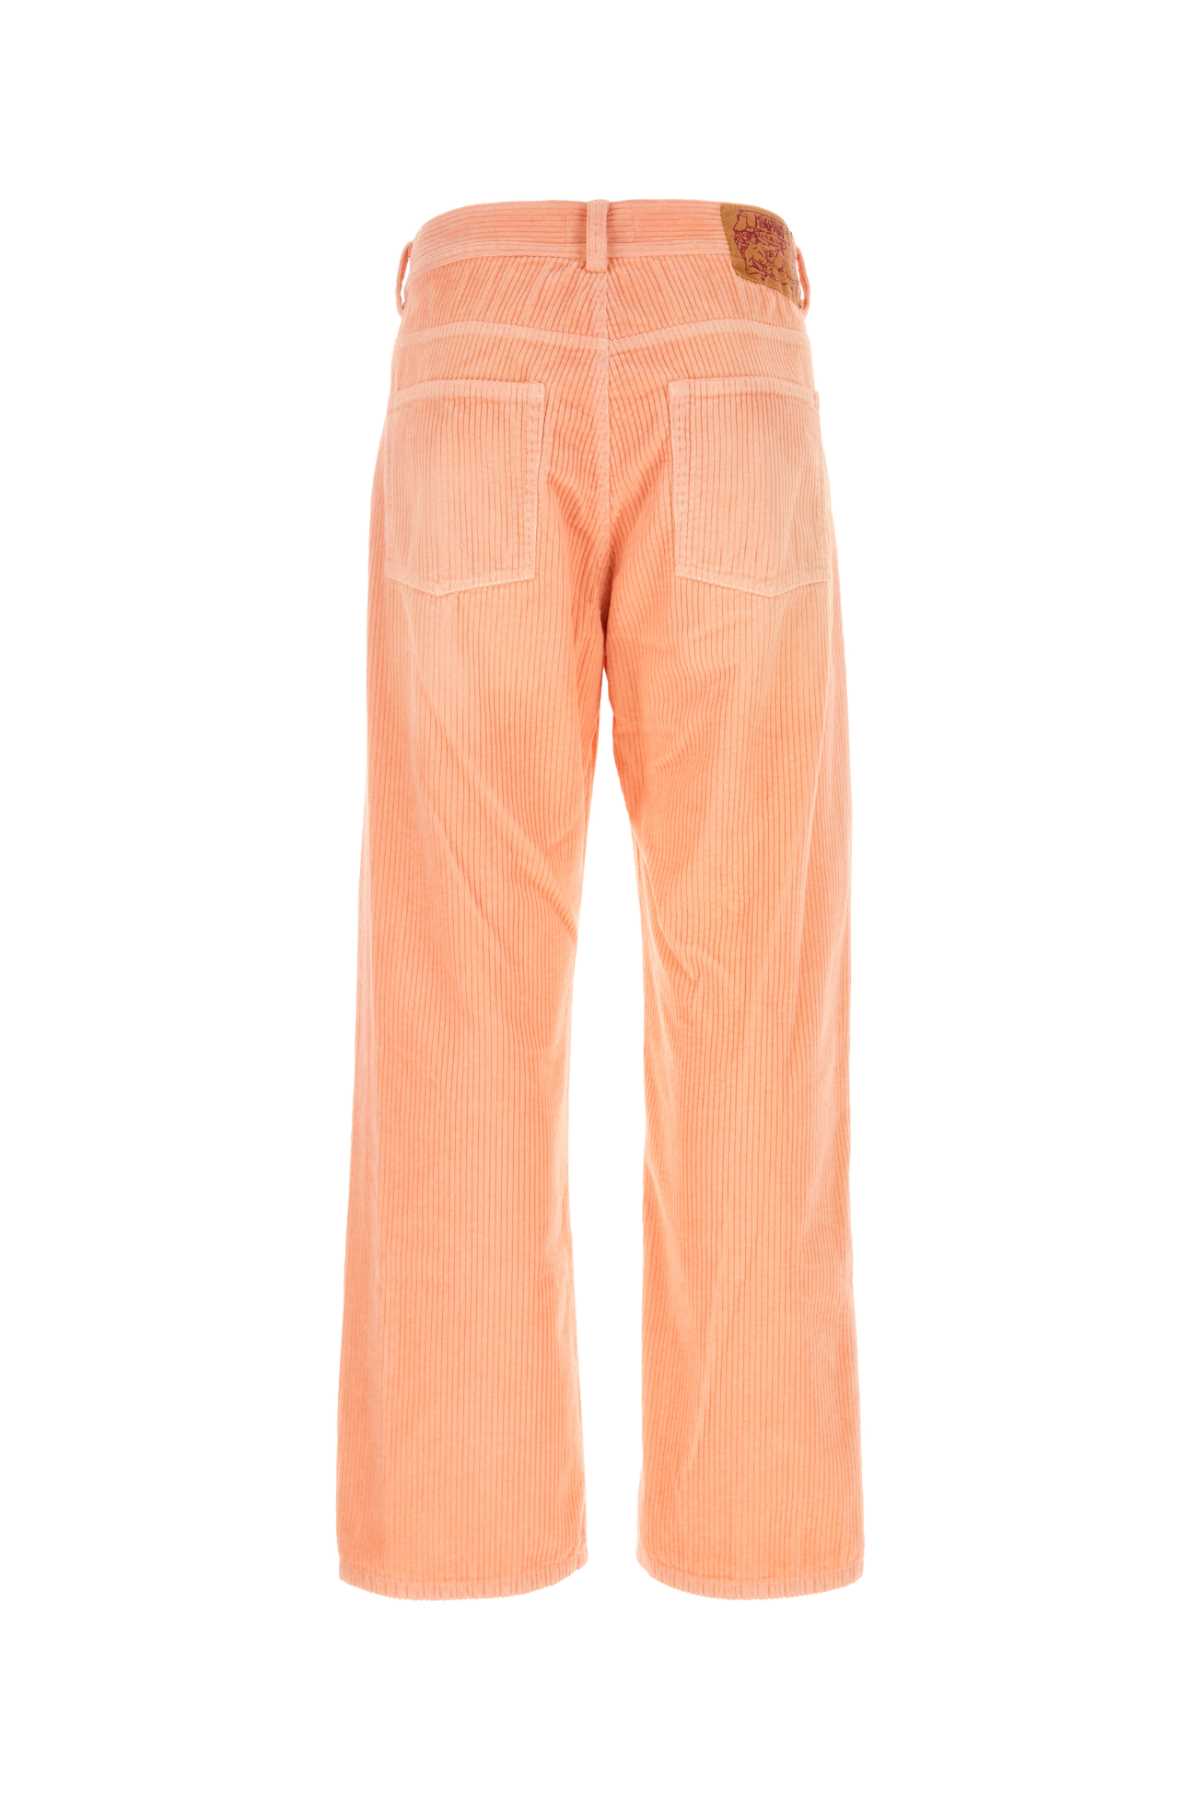 Shop Magliano Salmon Corduroy Pant In Dustypink